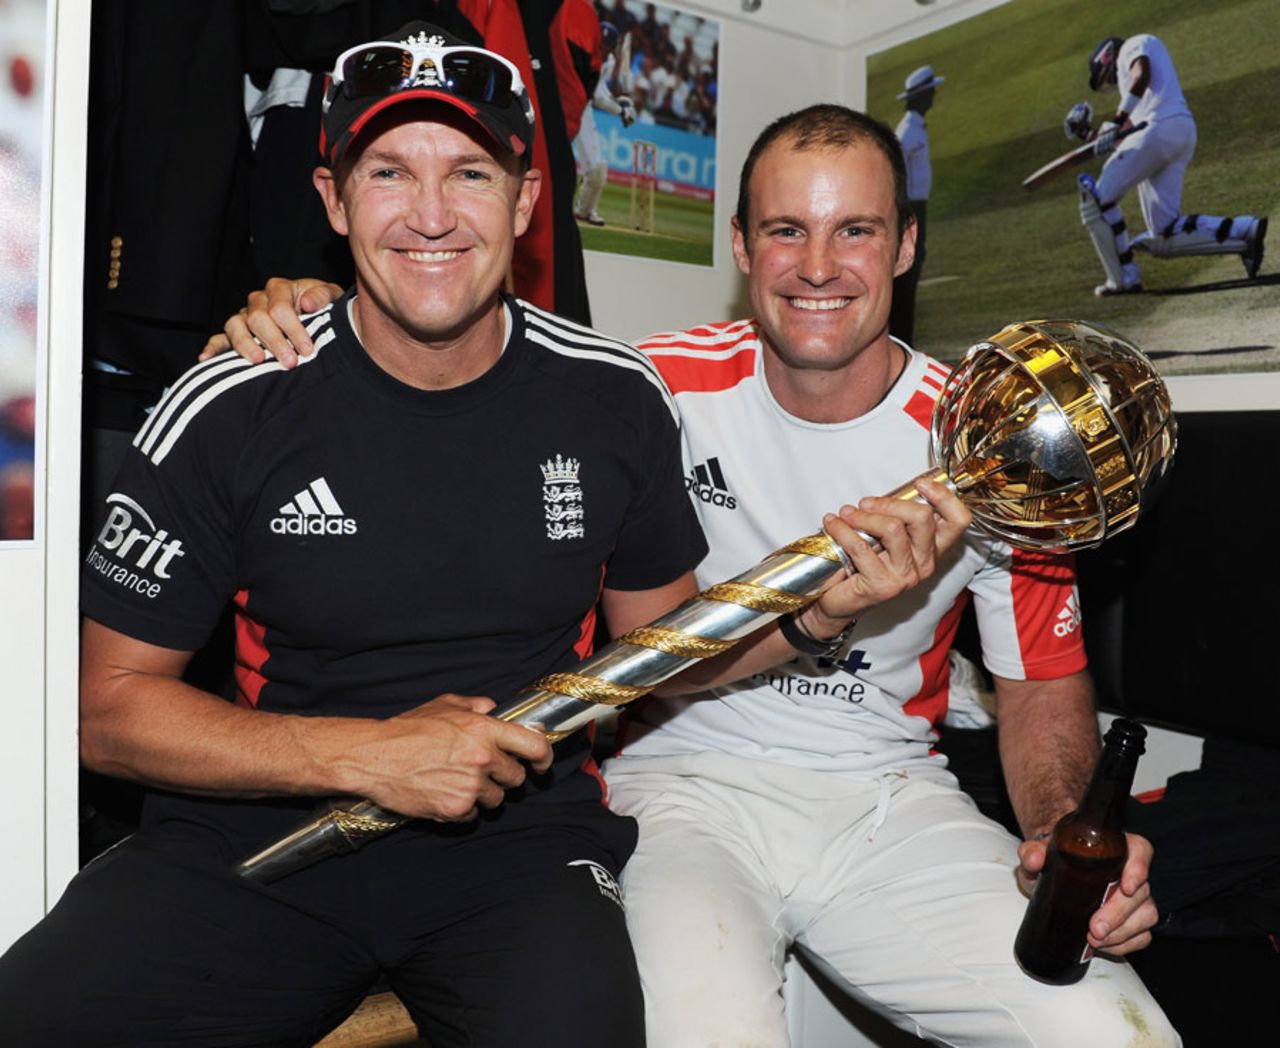 Andy Flower and Andrew Strauss strike a happy pose with the mace, England v India, 4th Test, The Oval, 5th day, August 22, 2011